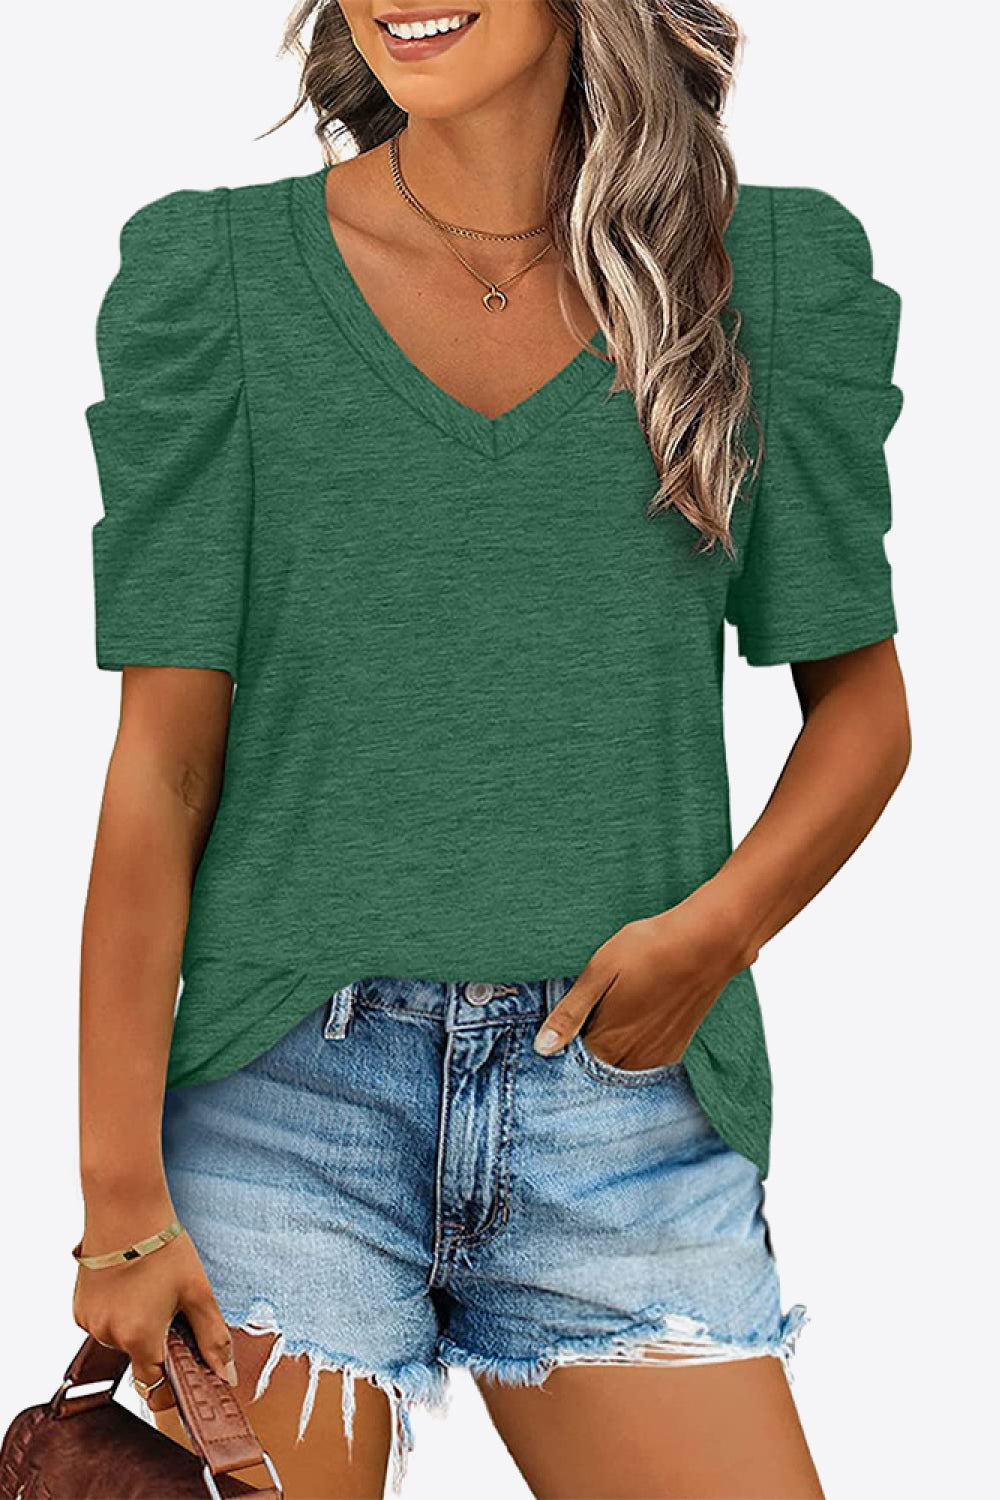 V-Neck Puff Sleeve Tee ( 6 Colors)  Krazy Heart Designs Boutique Forest S 